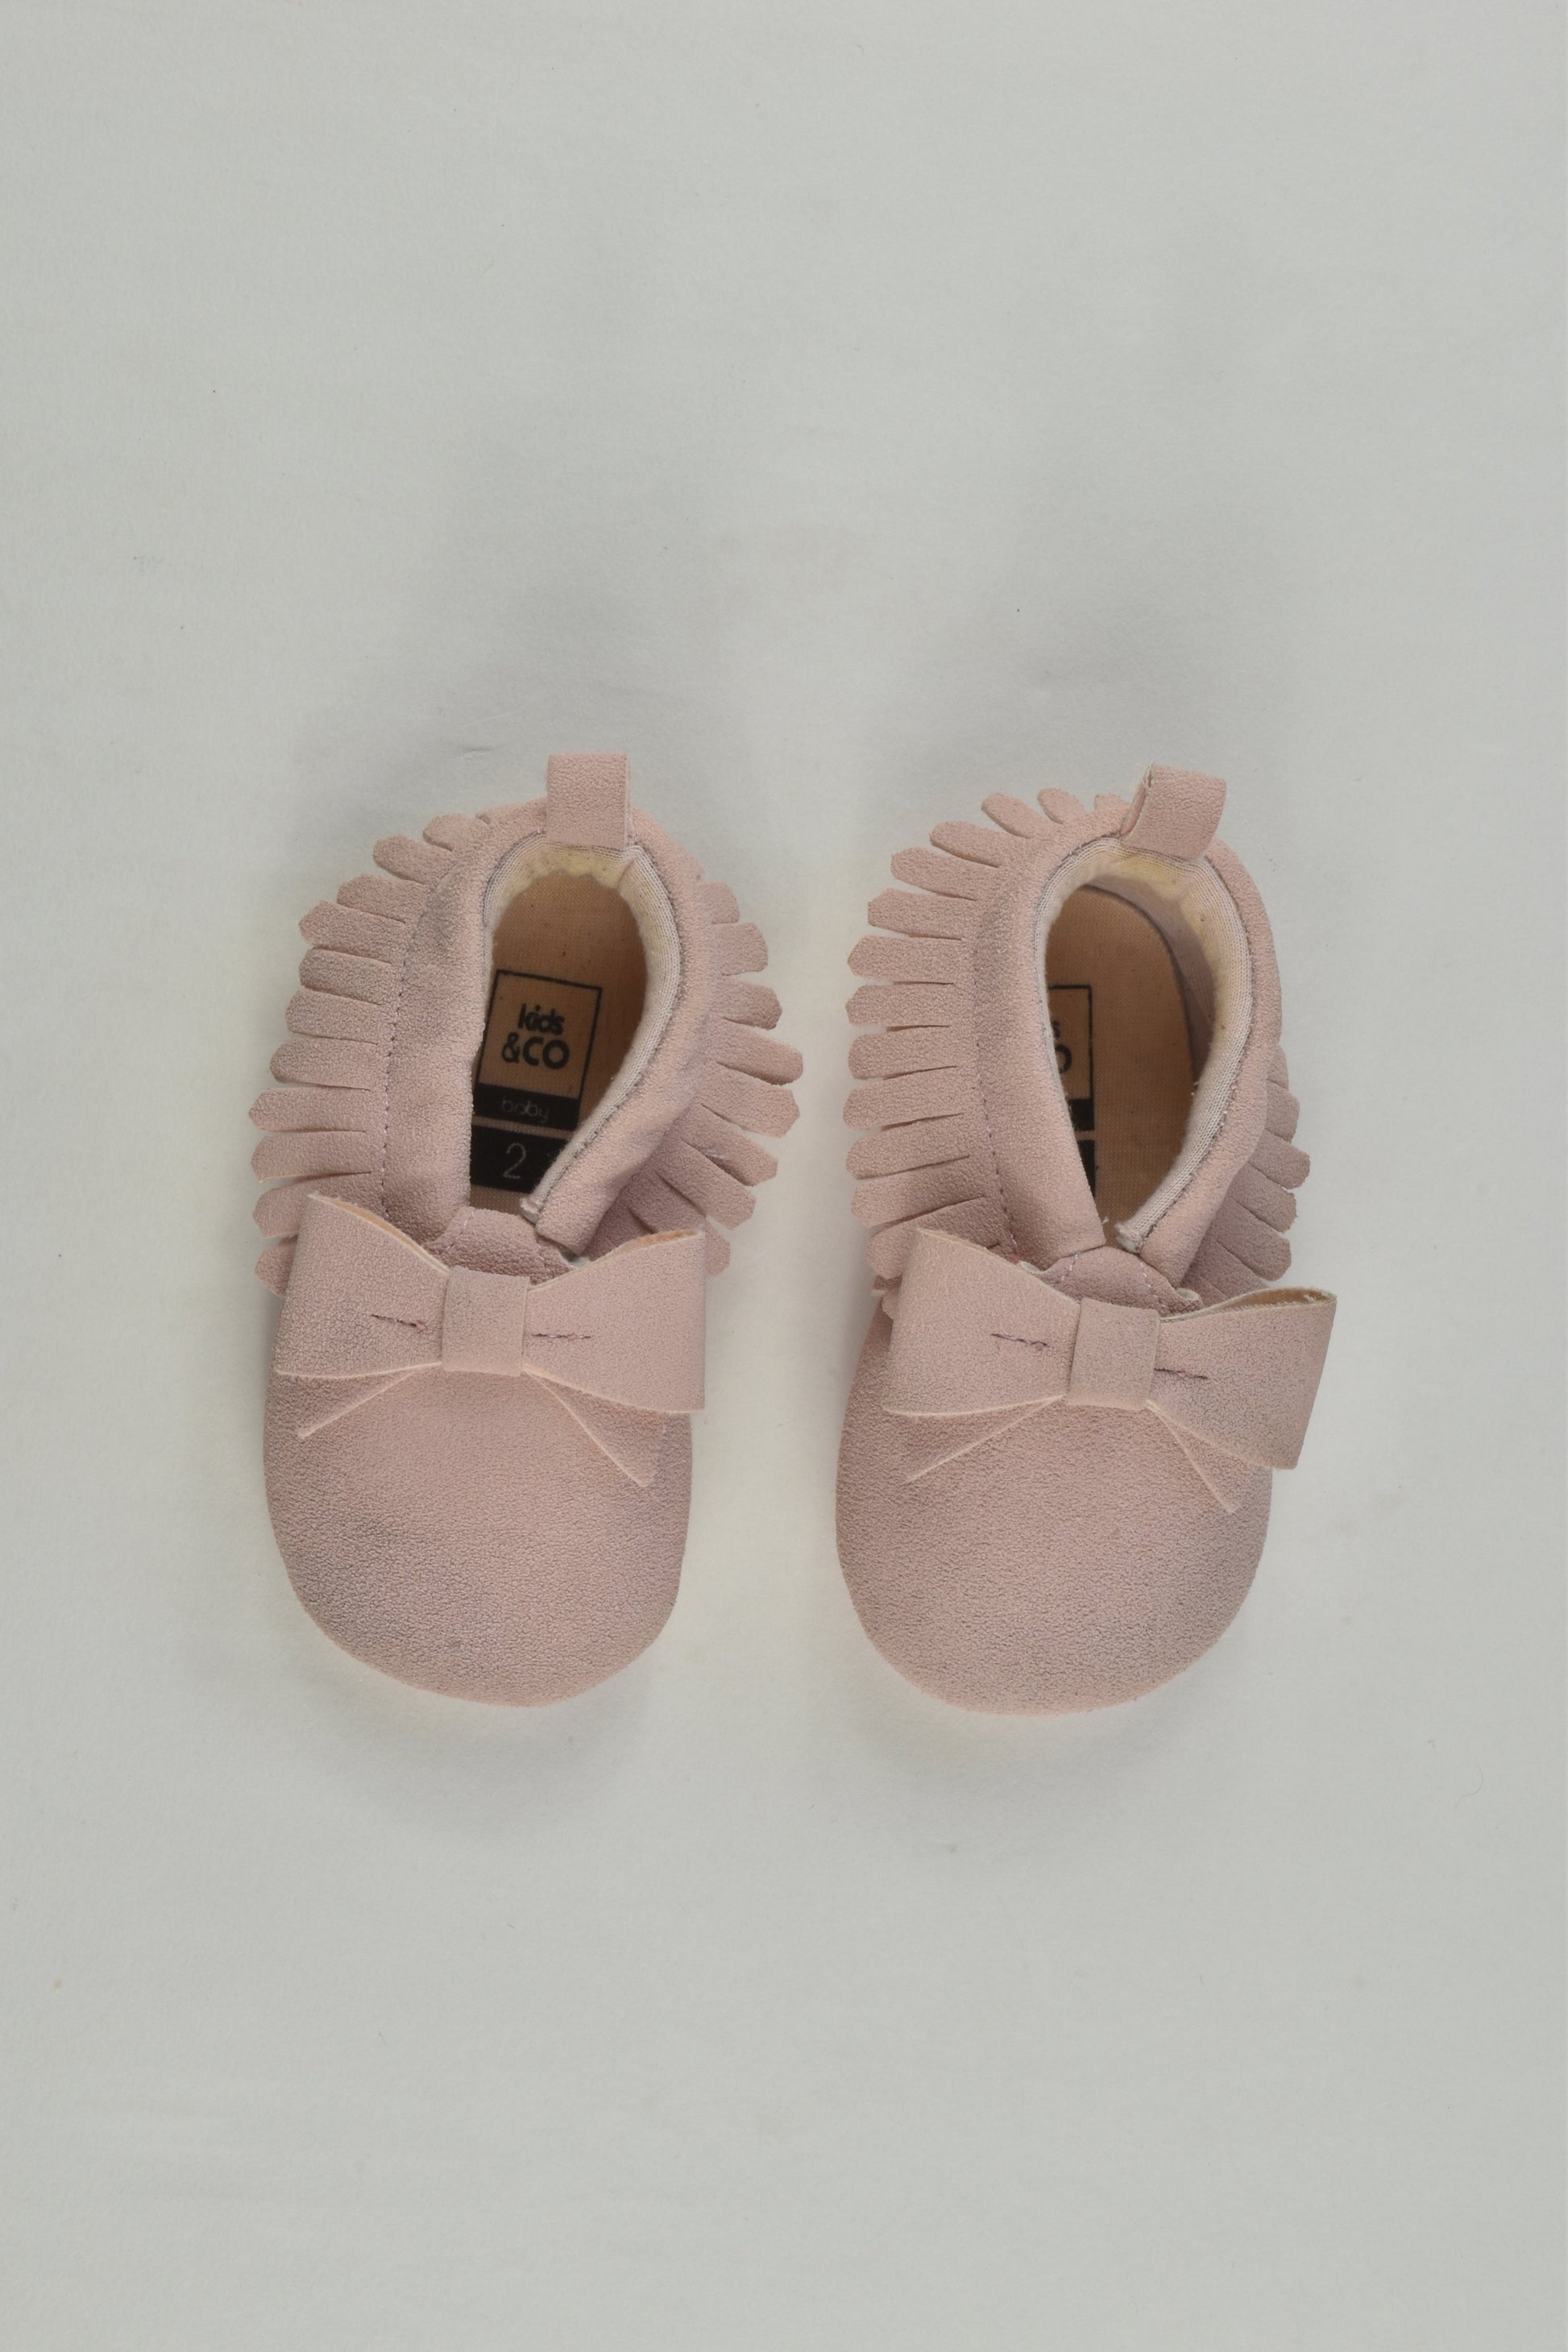 Kids & Co Size 2 Baby Shoes